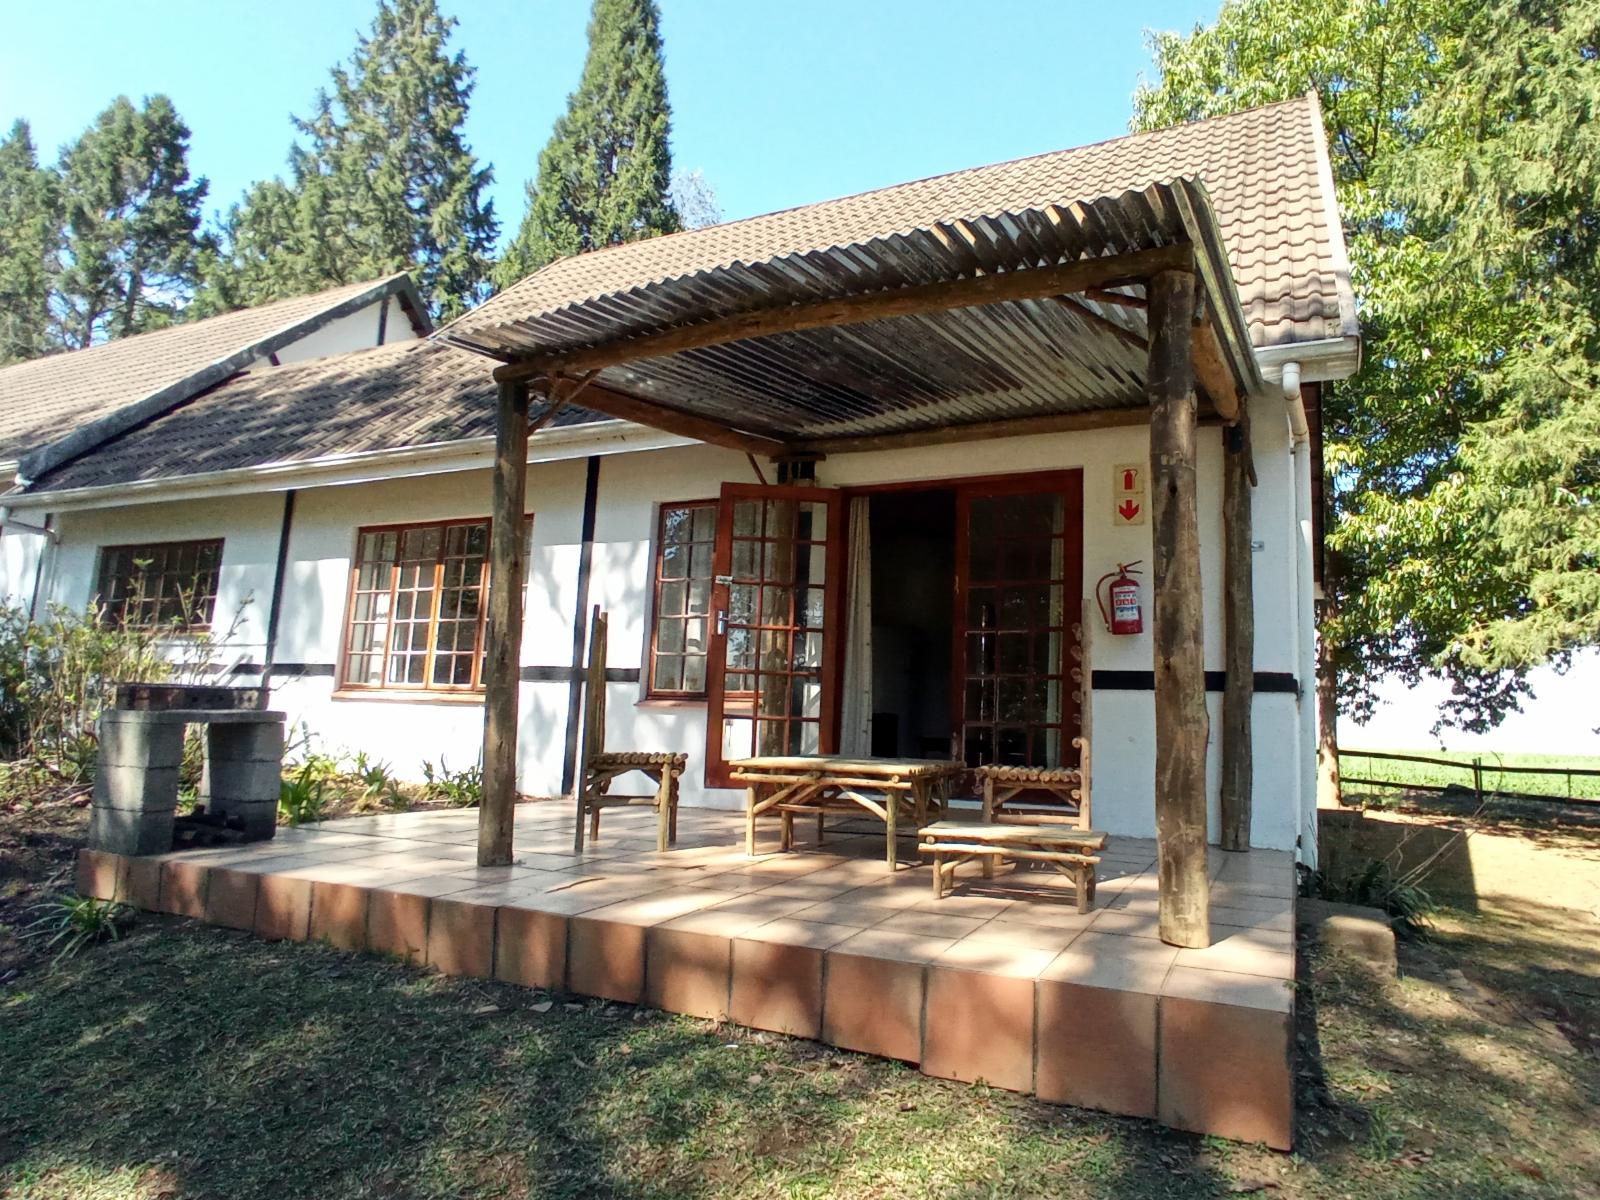 Self-Catering Cottage 1